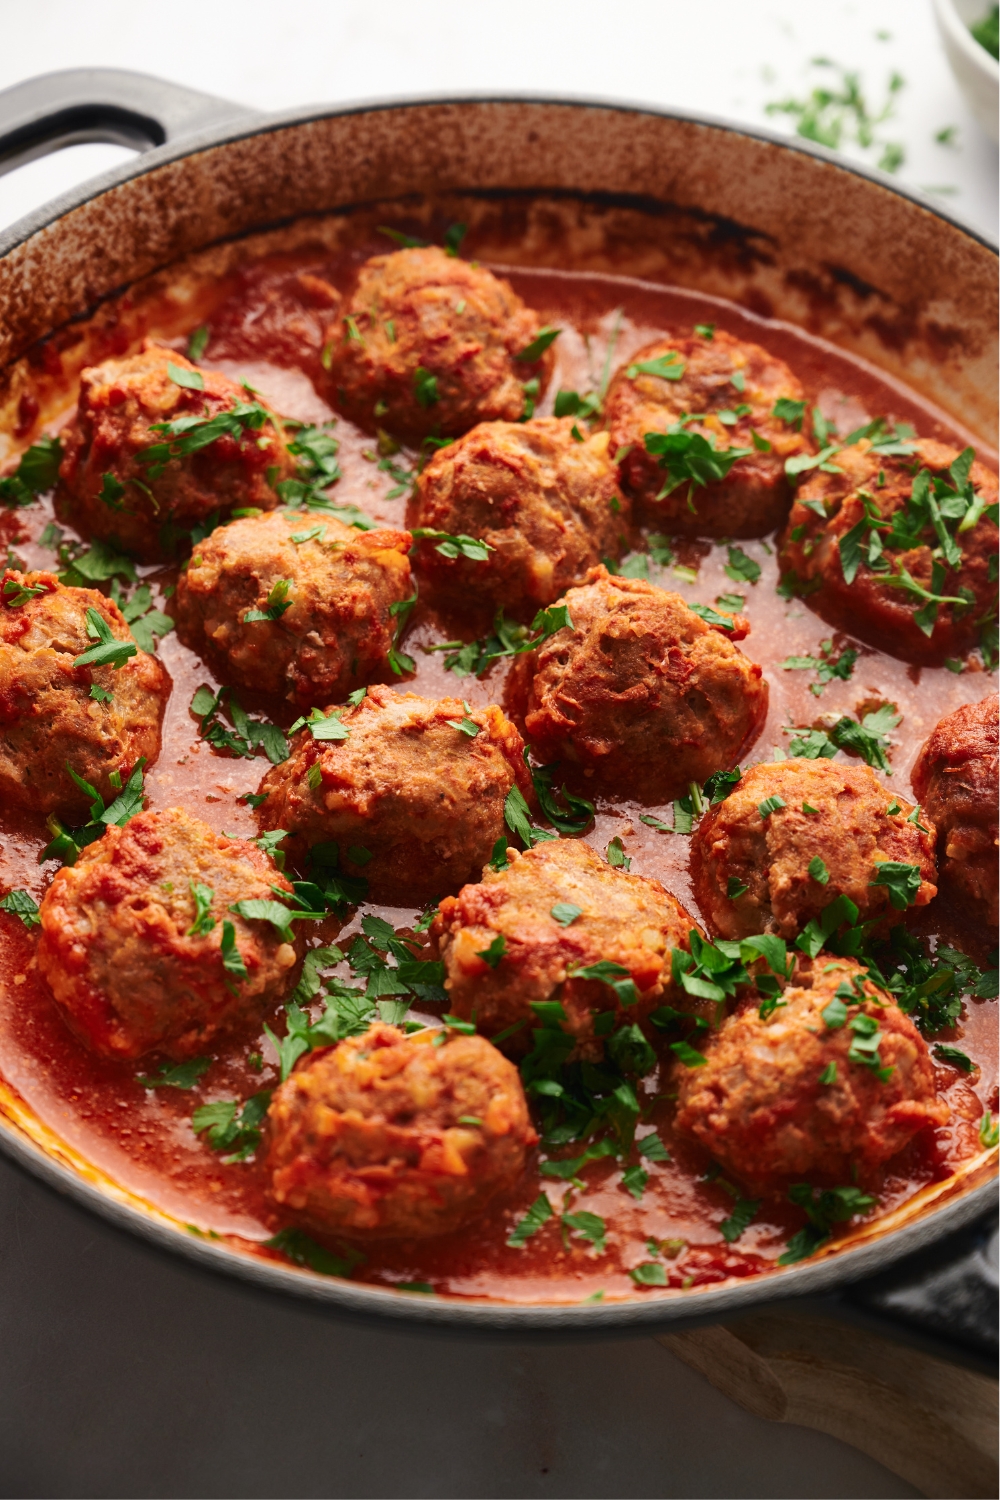 a pot of cooked meatballs in red sauce